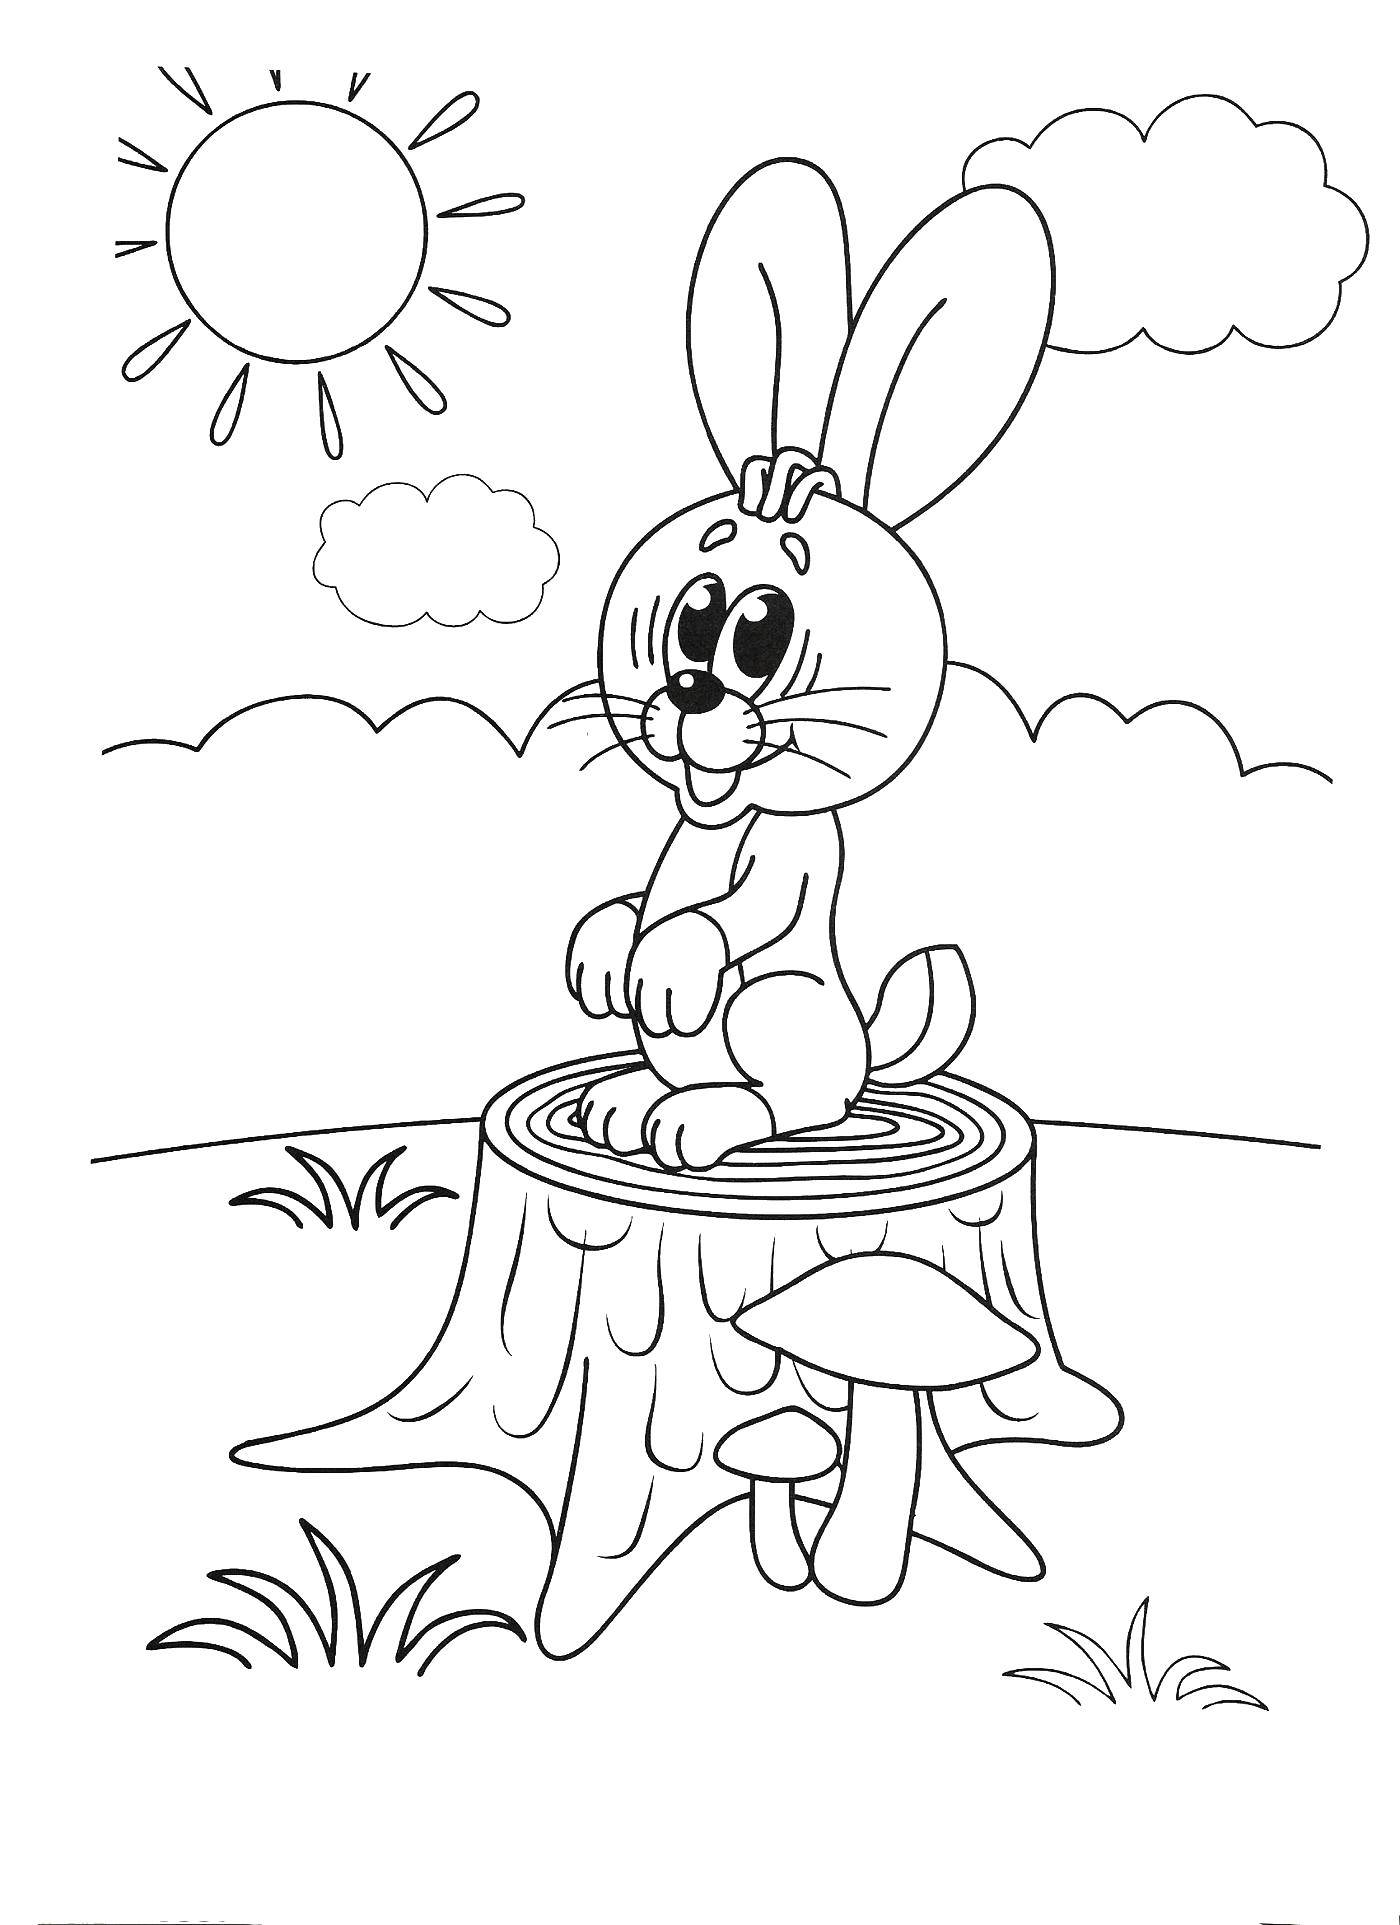 Coloring Bunny on tree stump. Category coloring for little ones. Tags:  Animals, Bunny.